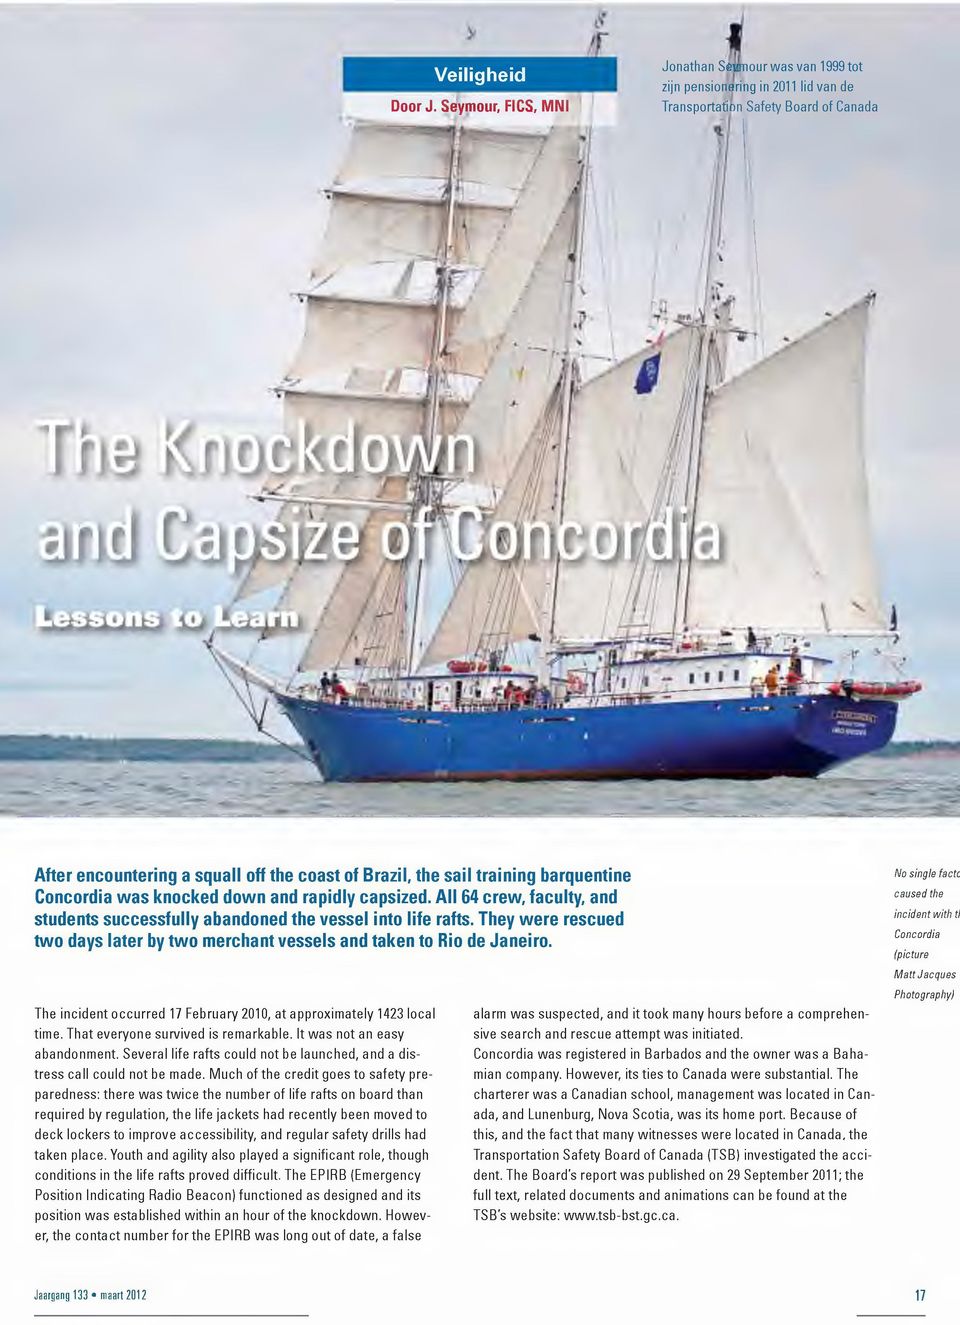 training barquentine Concordia was knocked down and rapidly capsized. All 64 crew, faculty, and students successfully abandoned the vessel into life rafts.